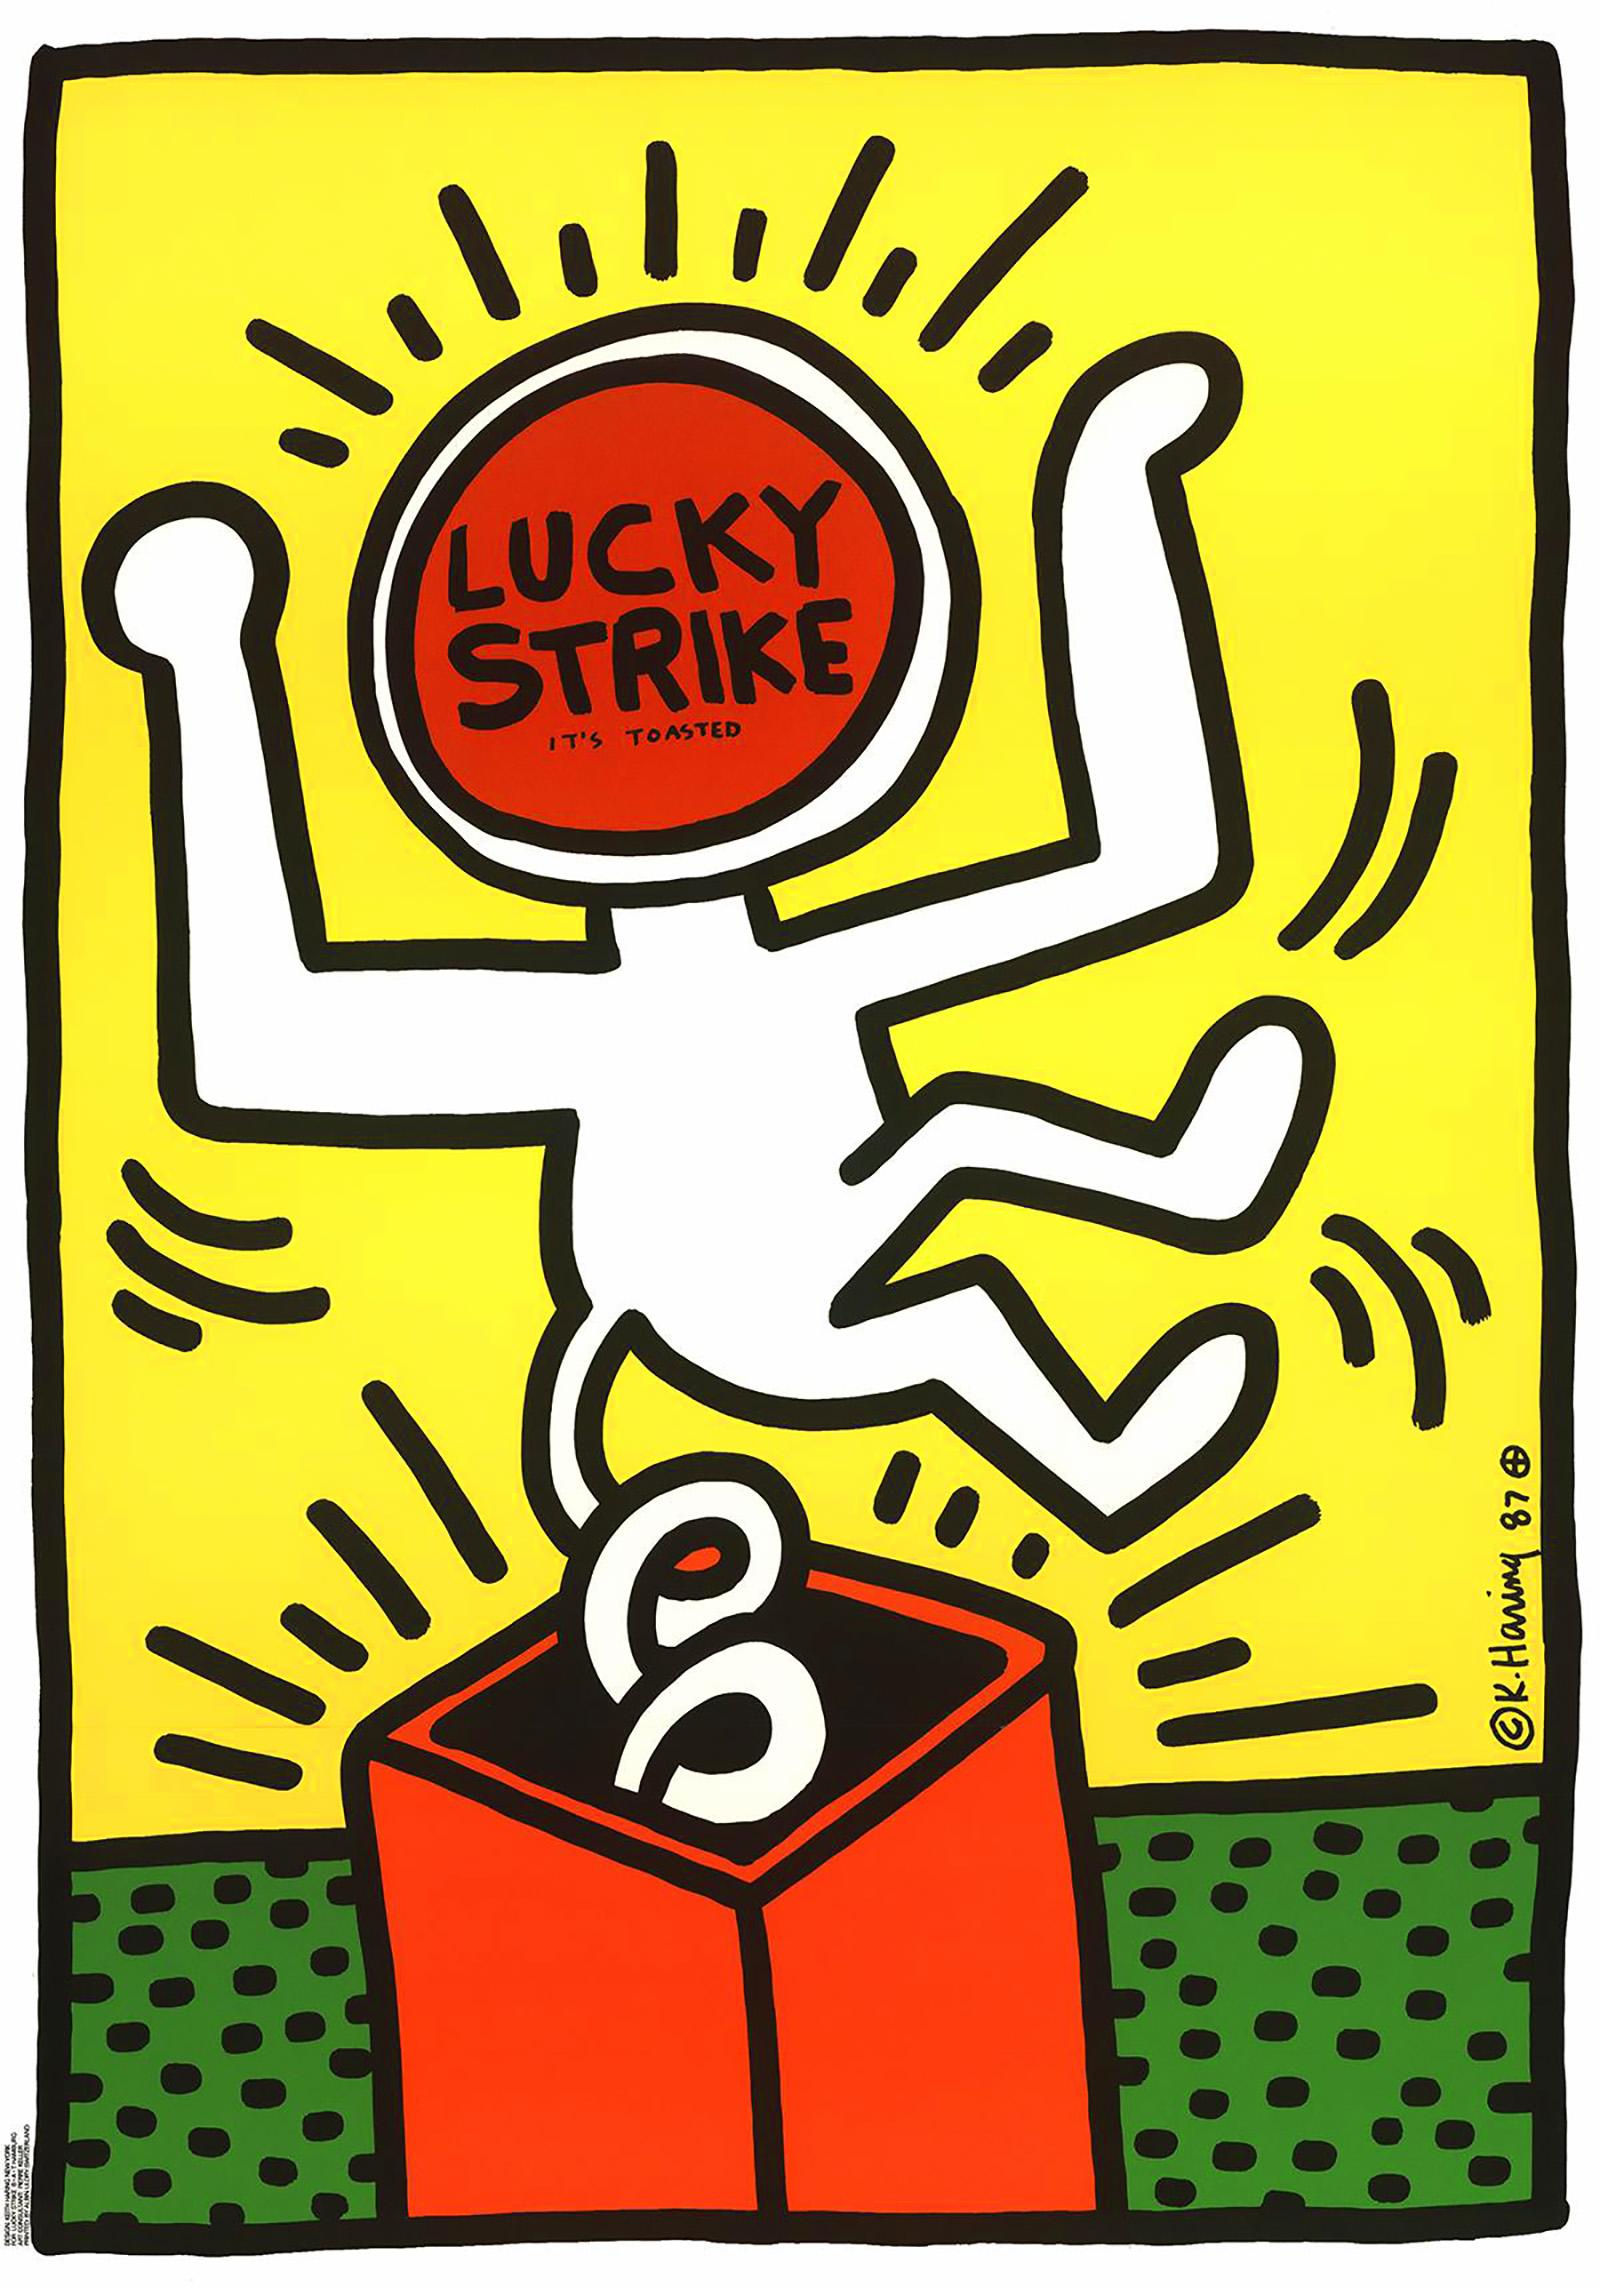 Keith Haring Lucky Strike 1987:
Vintage original 1980s Keith Haring poster designed & illustrated by Haring on behalf of the long-time cigarette brand, Lucky Strike. Catalog Raisonne: Keith Haring: Posters (Prestel publishing):

"The advertising